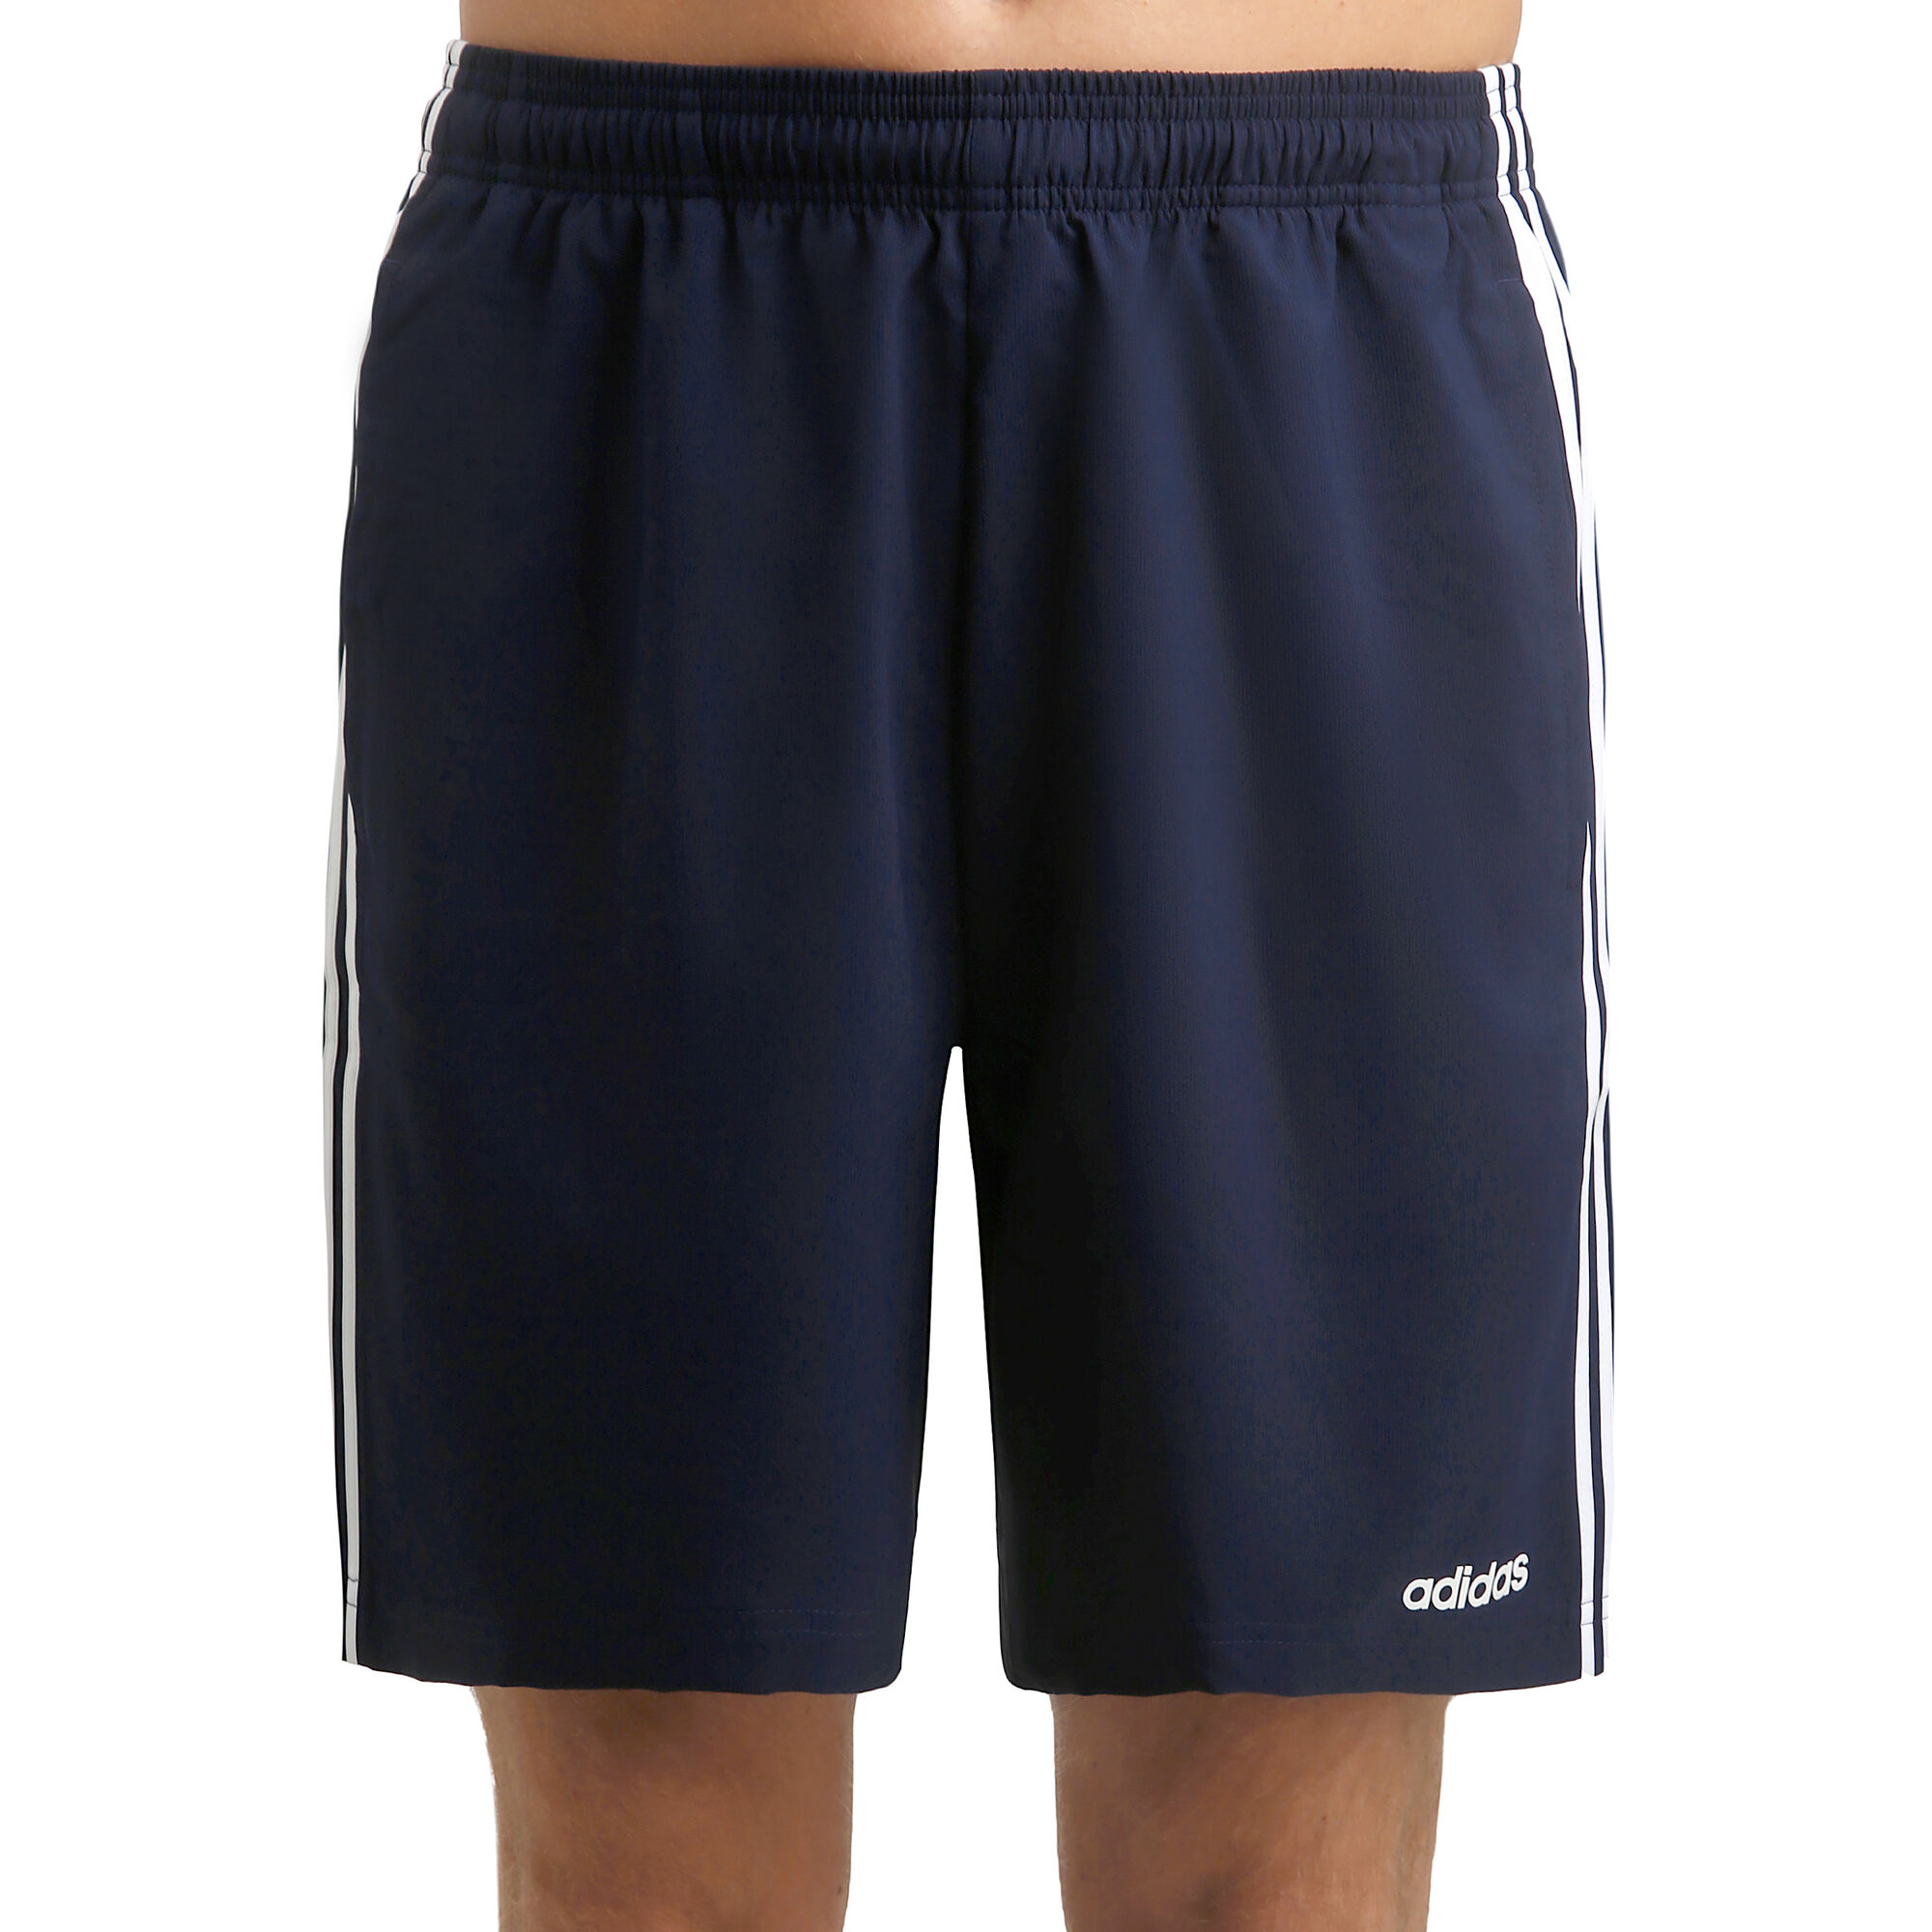 Essentials Chelsea Shorts Hombres - Azul Oscuro, Blanco compra online | Tennis-Point